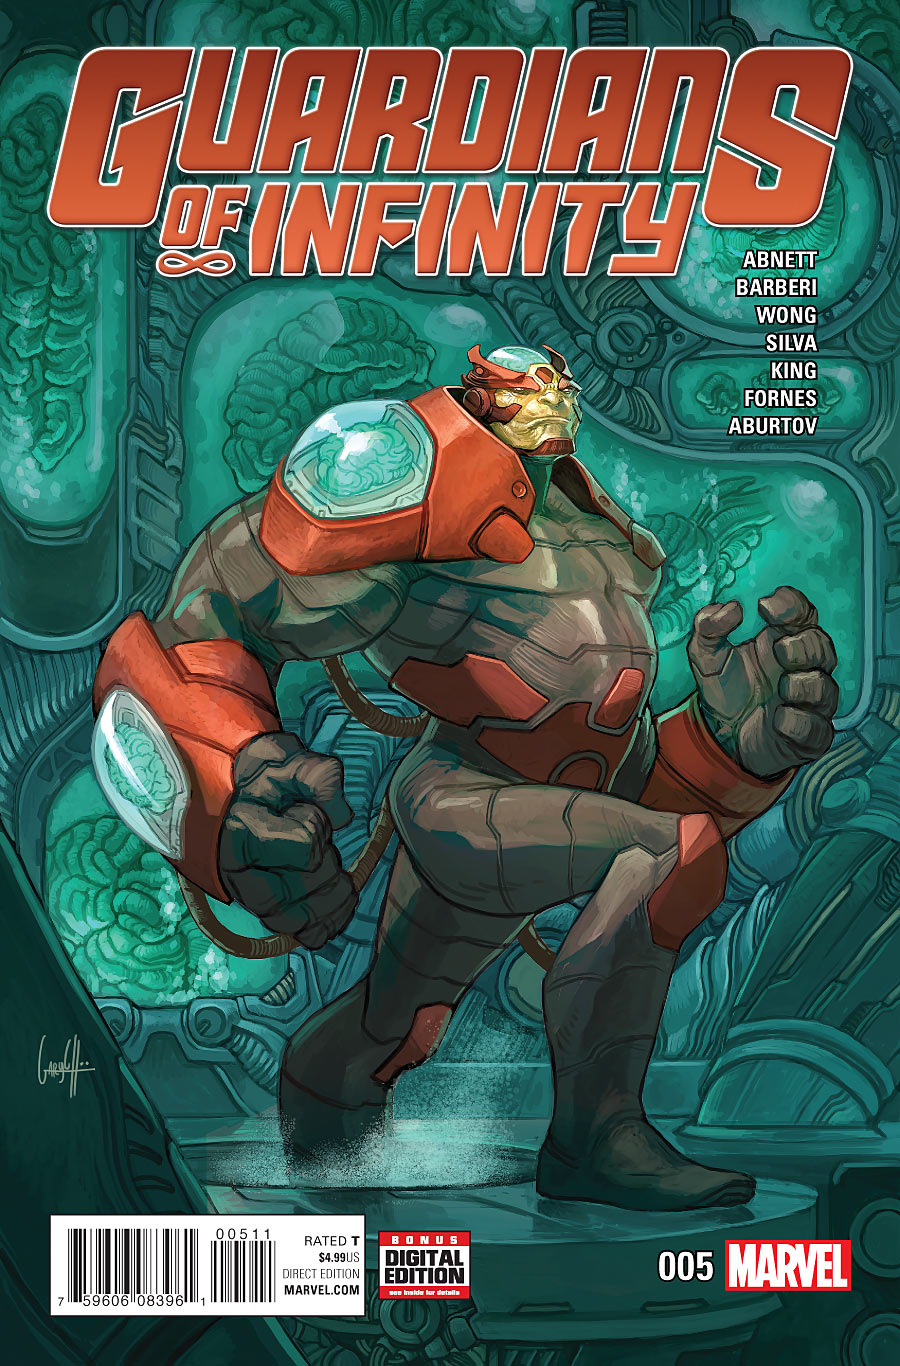 GUARDIANS OF INFINITY #5